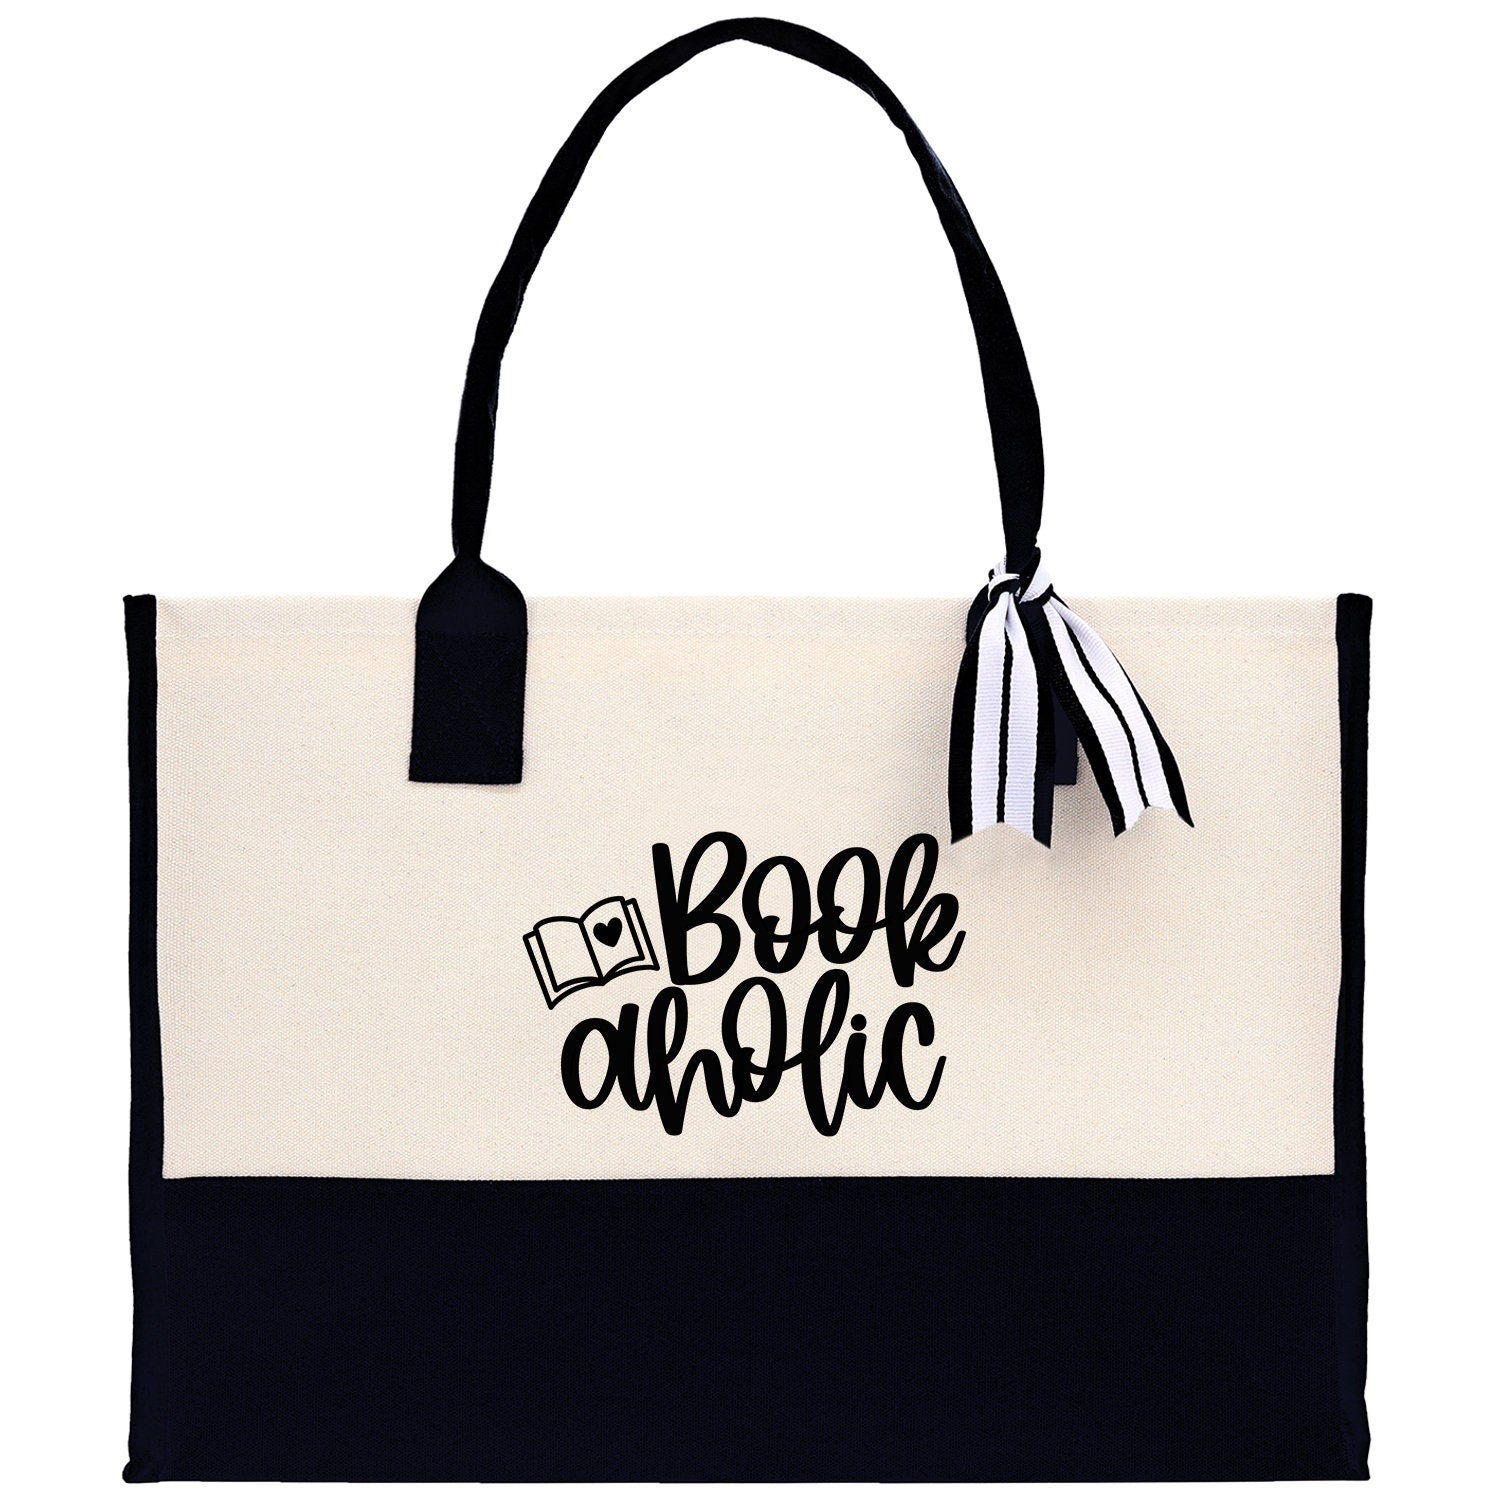 Book aholic Tote Bag Bookworm Gift Book Quotes Party Gift Book Lover Tote Book Canvas Tote Bag Birthday Gift Library Bag Grocery Bag